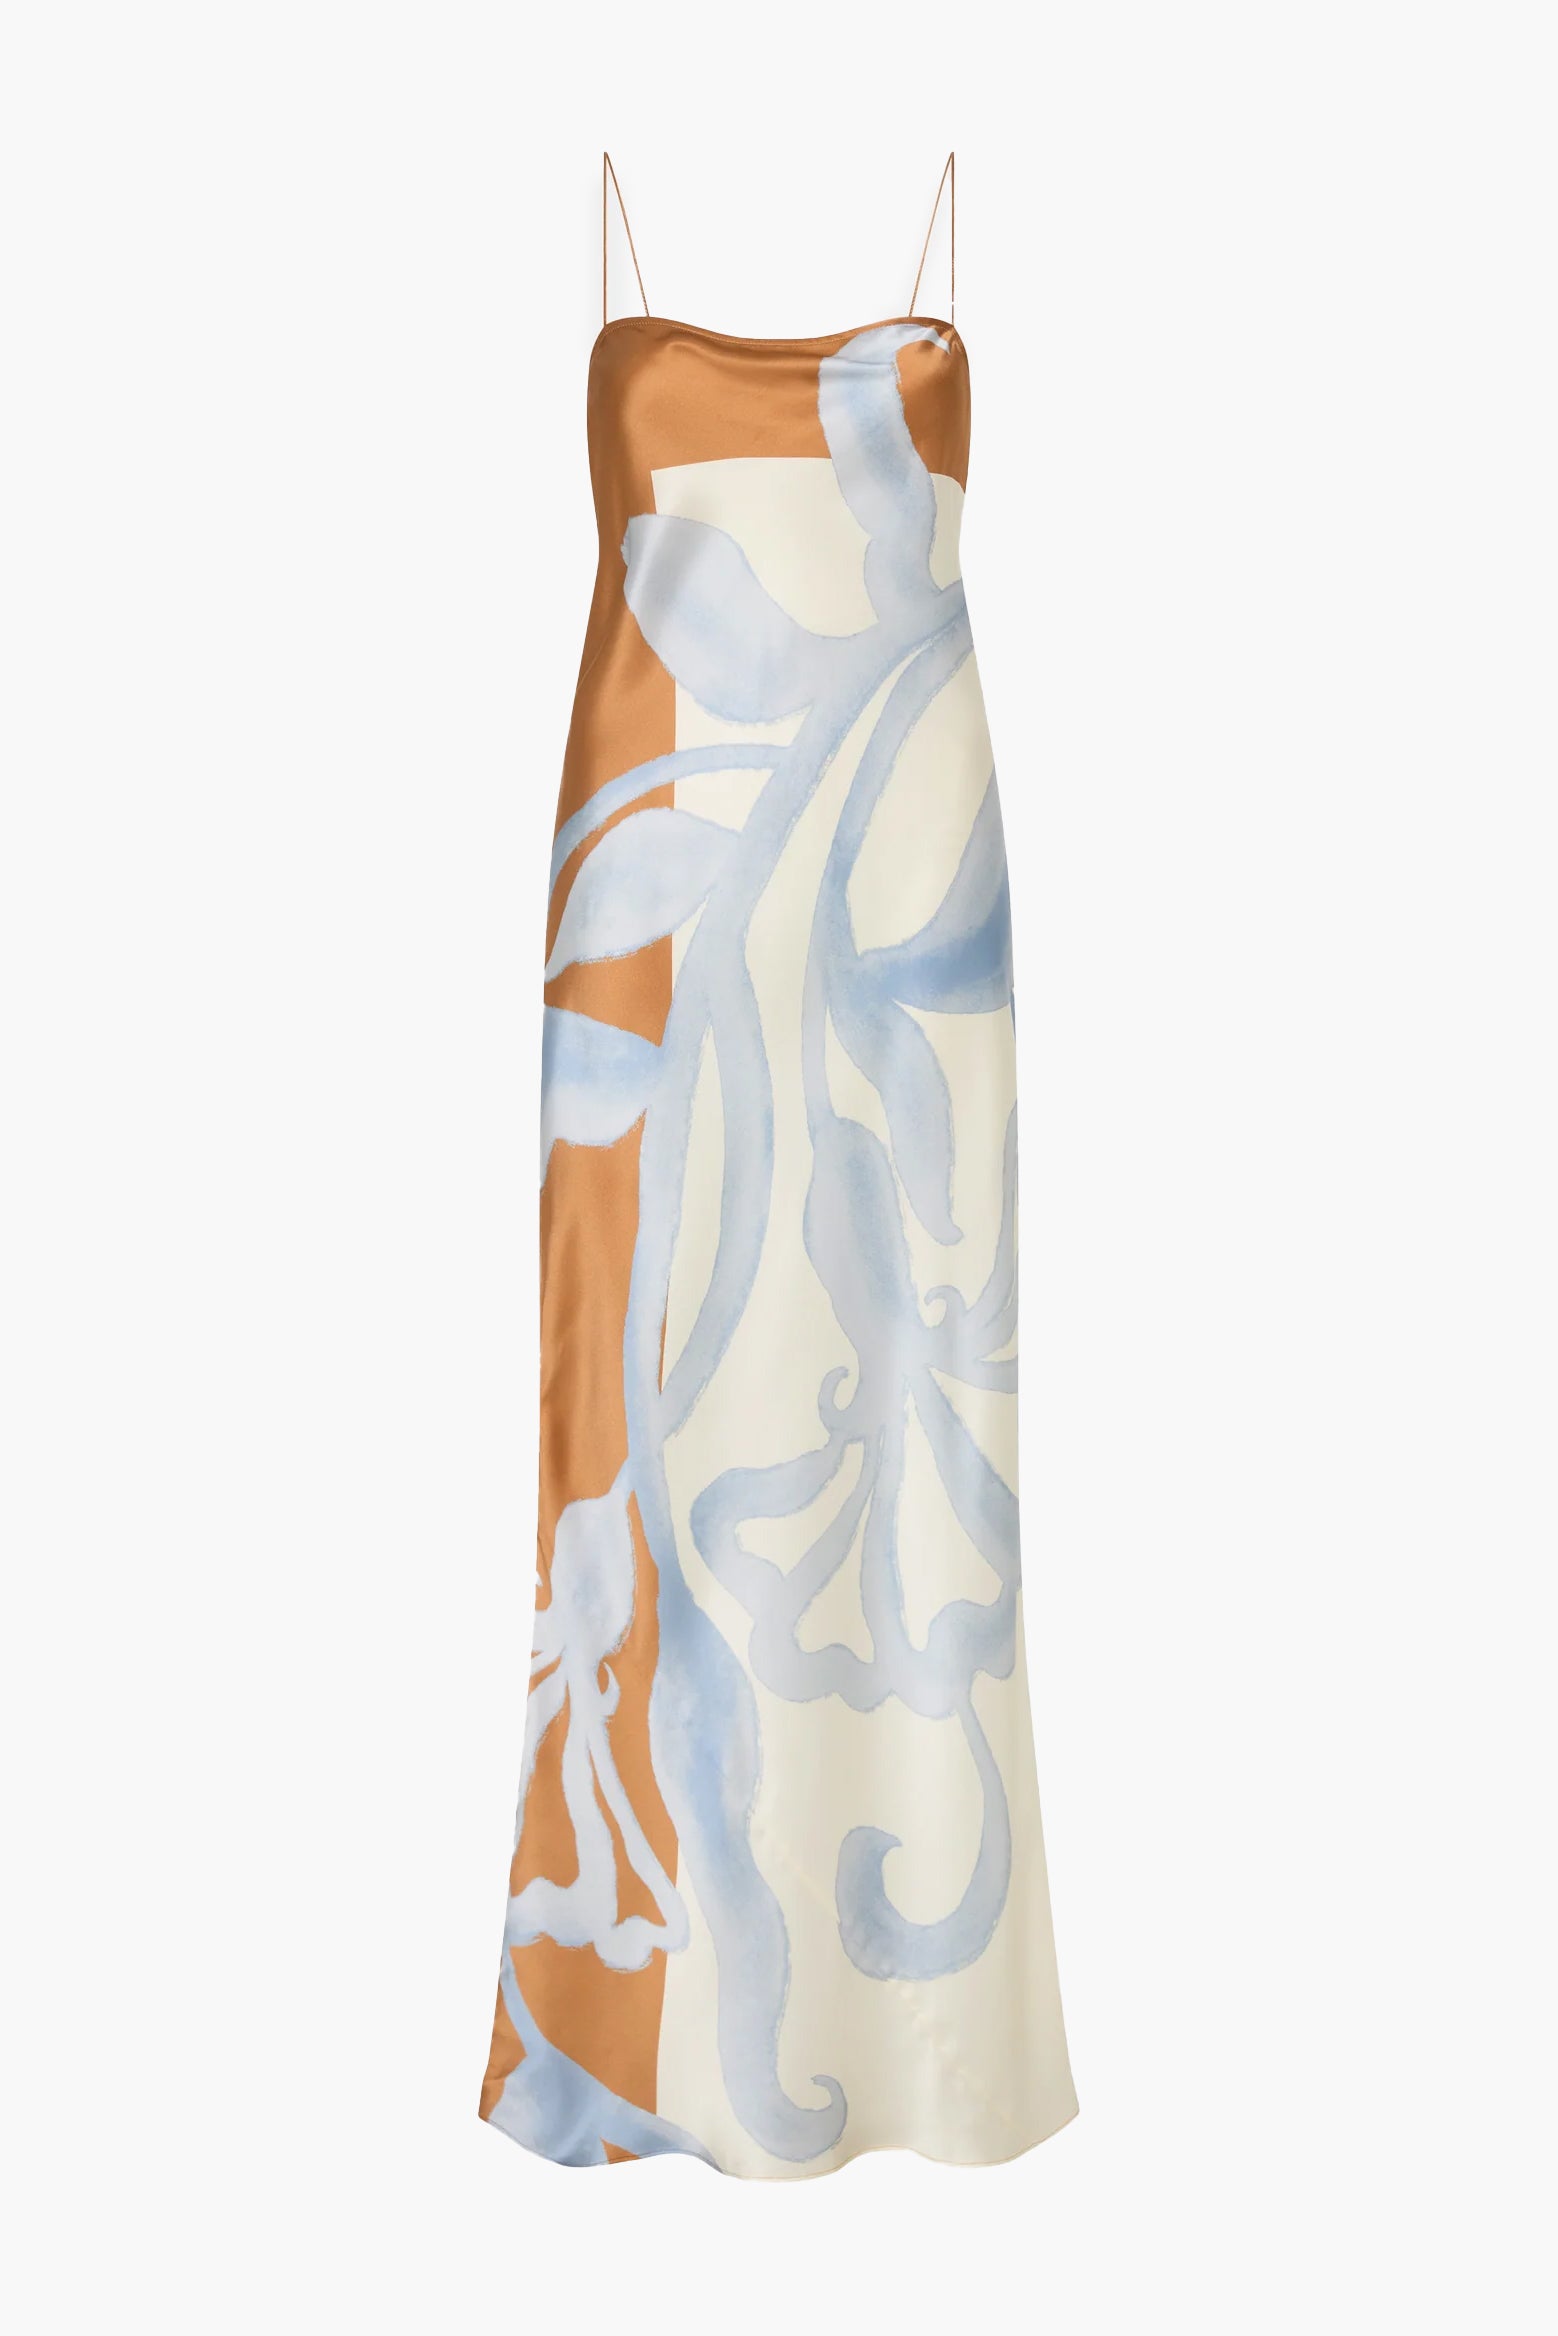 SIR Sorrento Slip Dress in Sciarpa Print available at The New Trend Australia. 